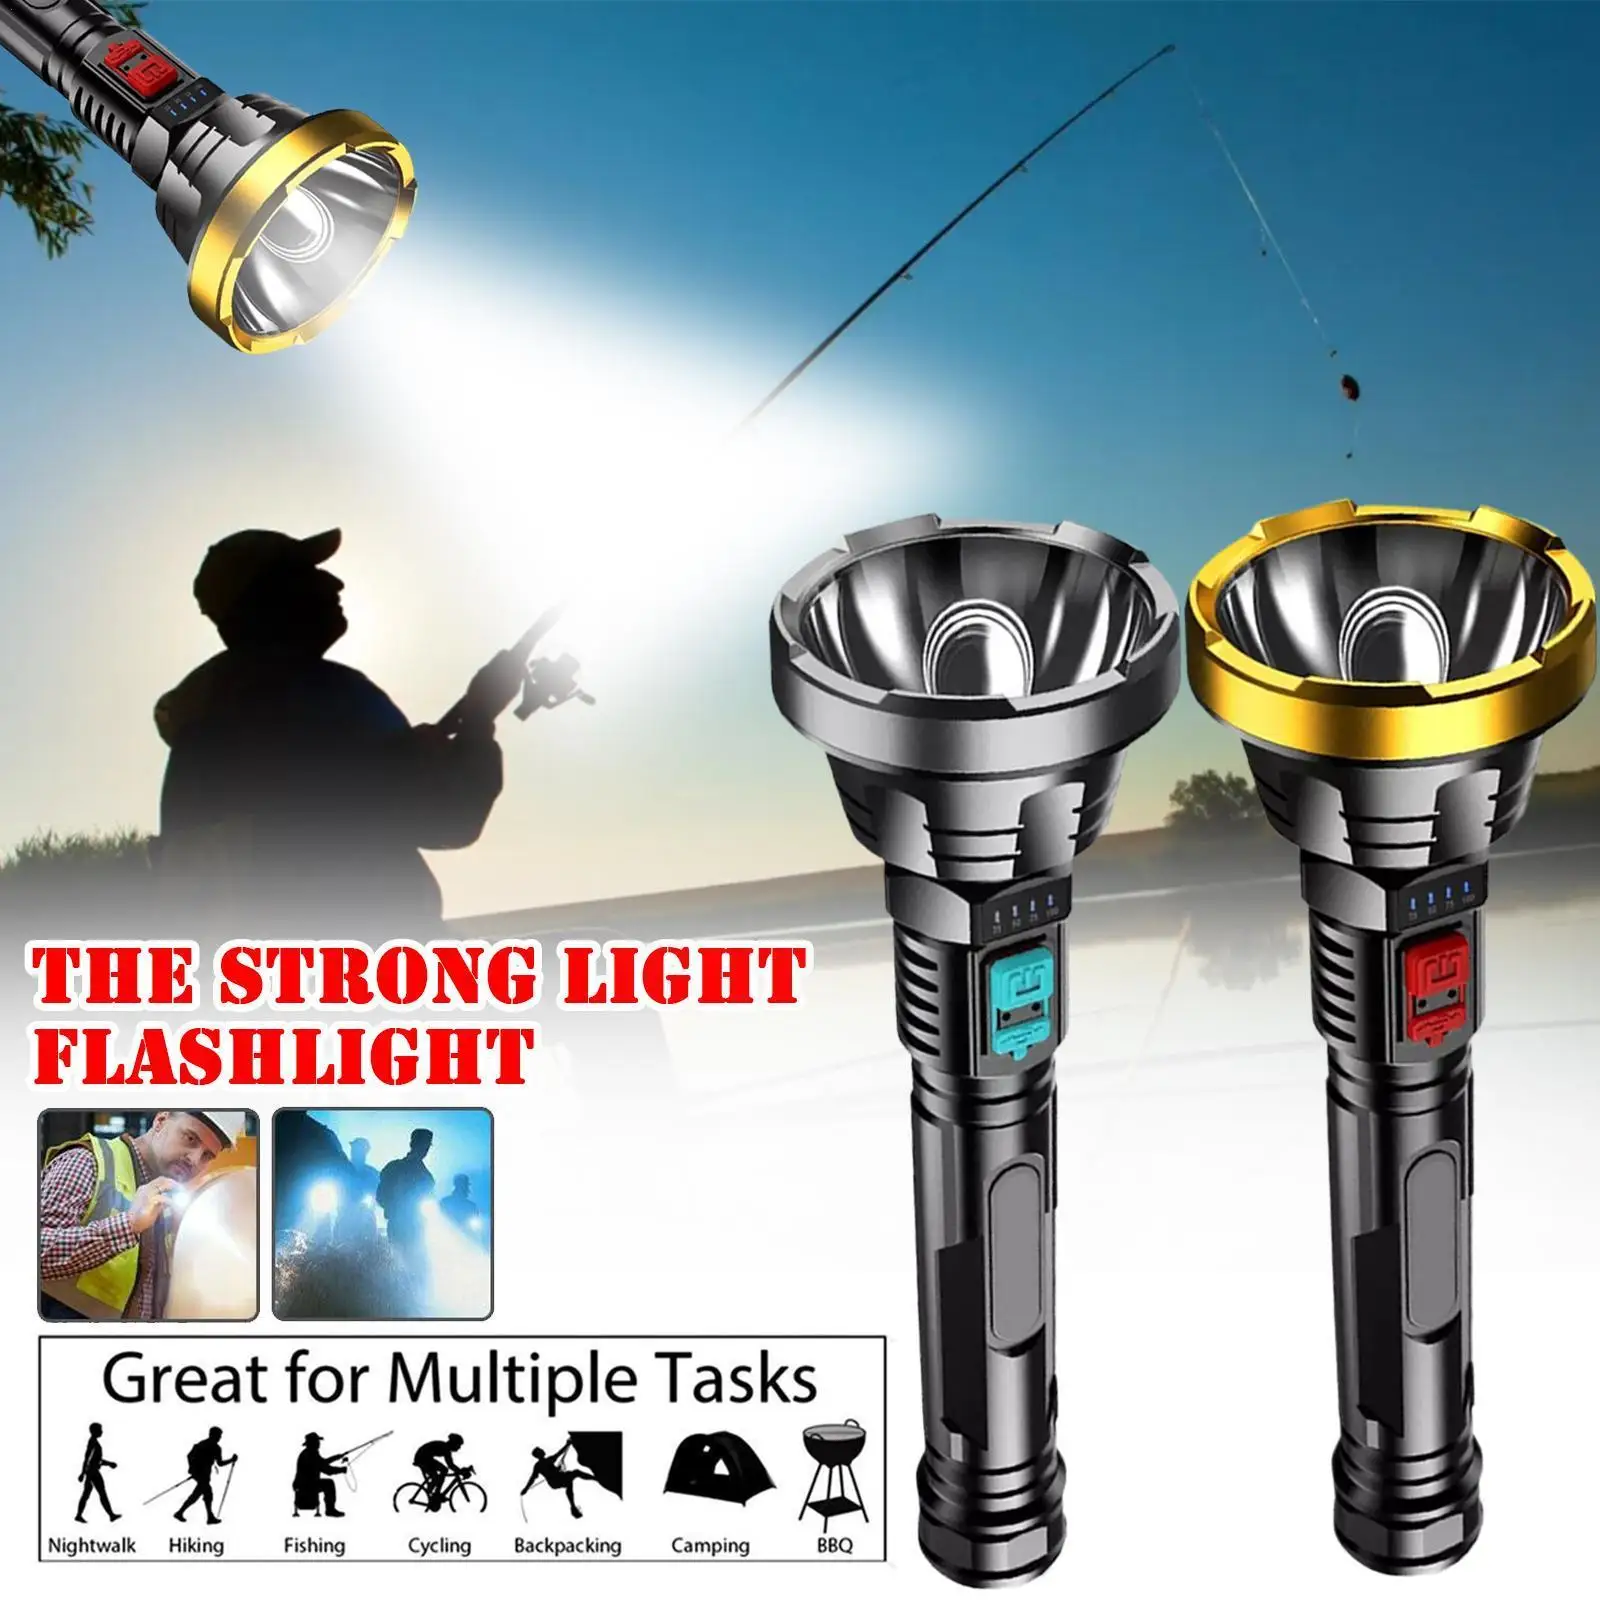 Multifunction LED Flashlight Powerful USB Rechargeable Waterproof Outdoor Lighting Torch Camping Tactical Lights Lamp S5M0